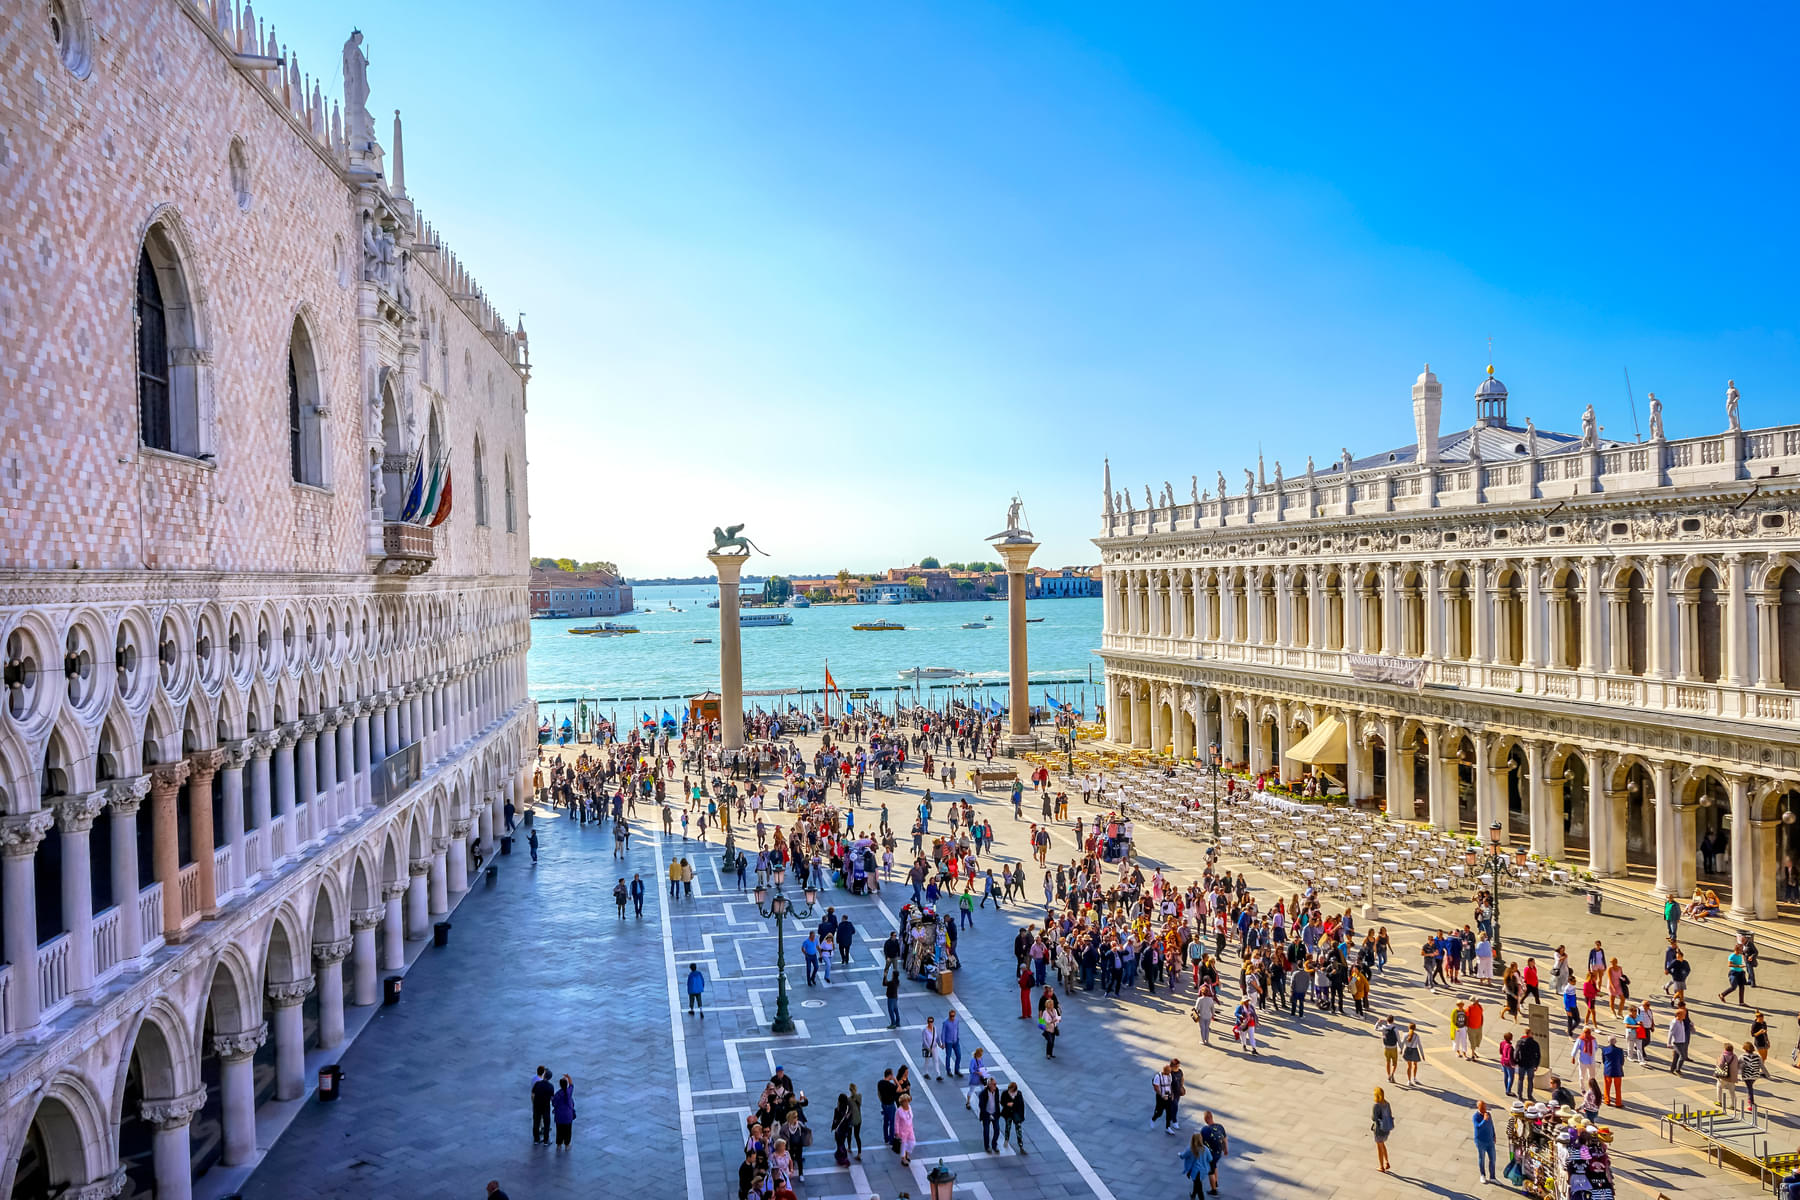 What to avoid Wearing to the Doge's Palace?